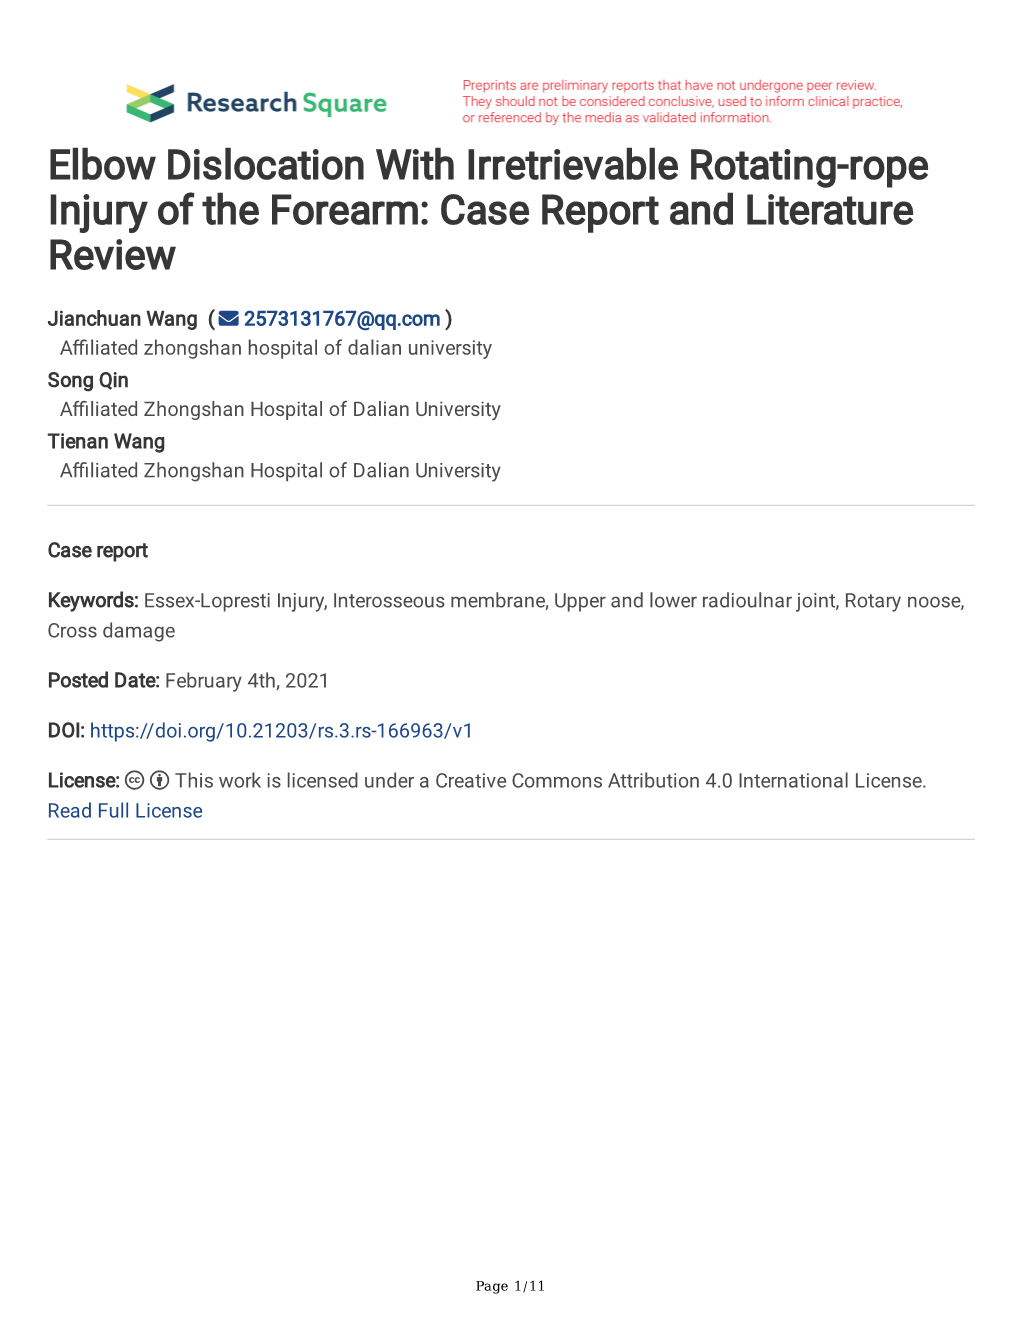 Elbow Dislocation with Irretrievable Rotating-Rope Injury of the Forearm: Case Report and Literature Review